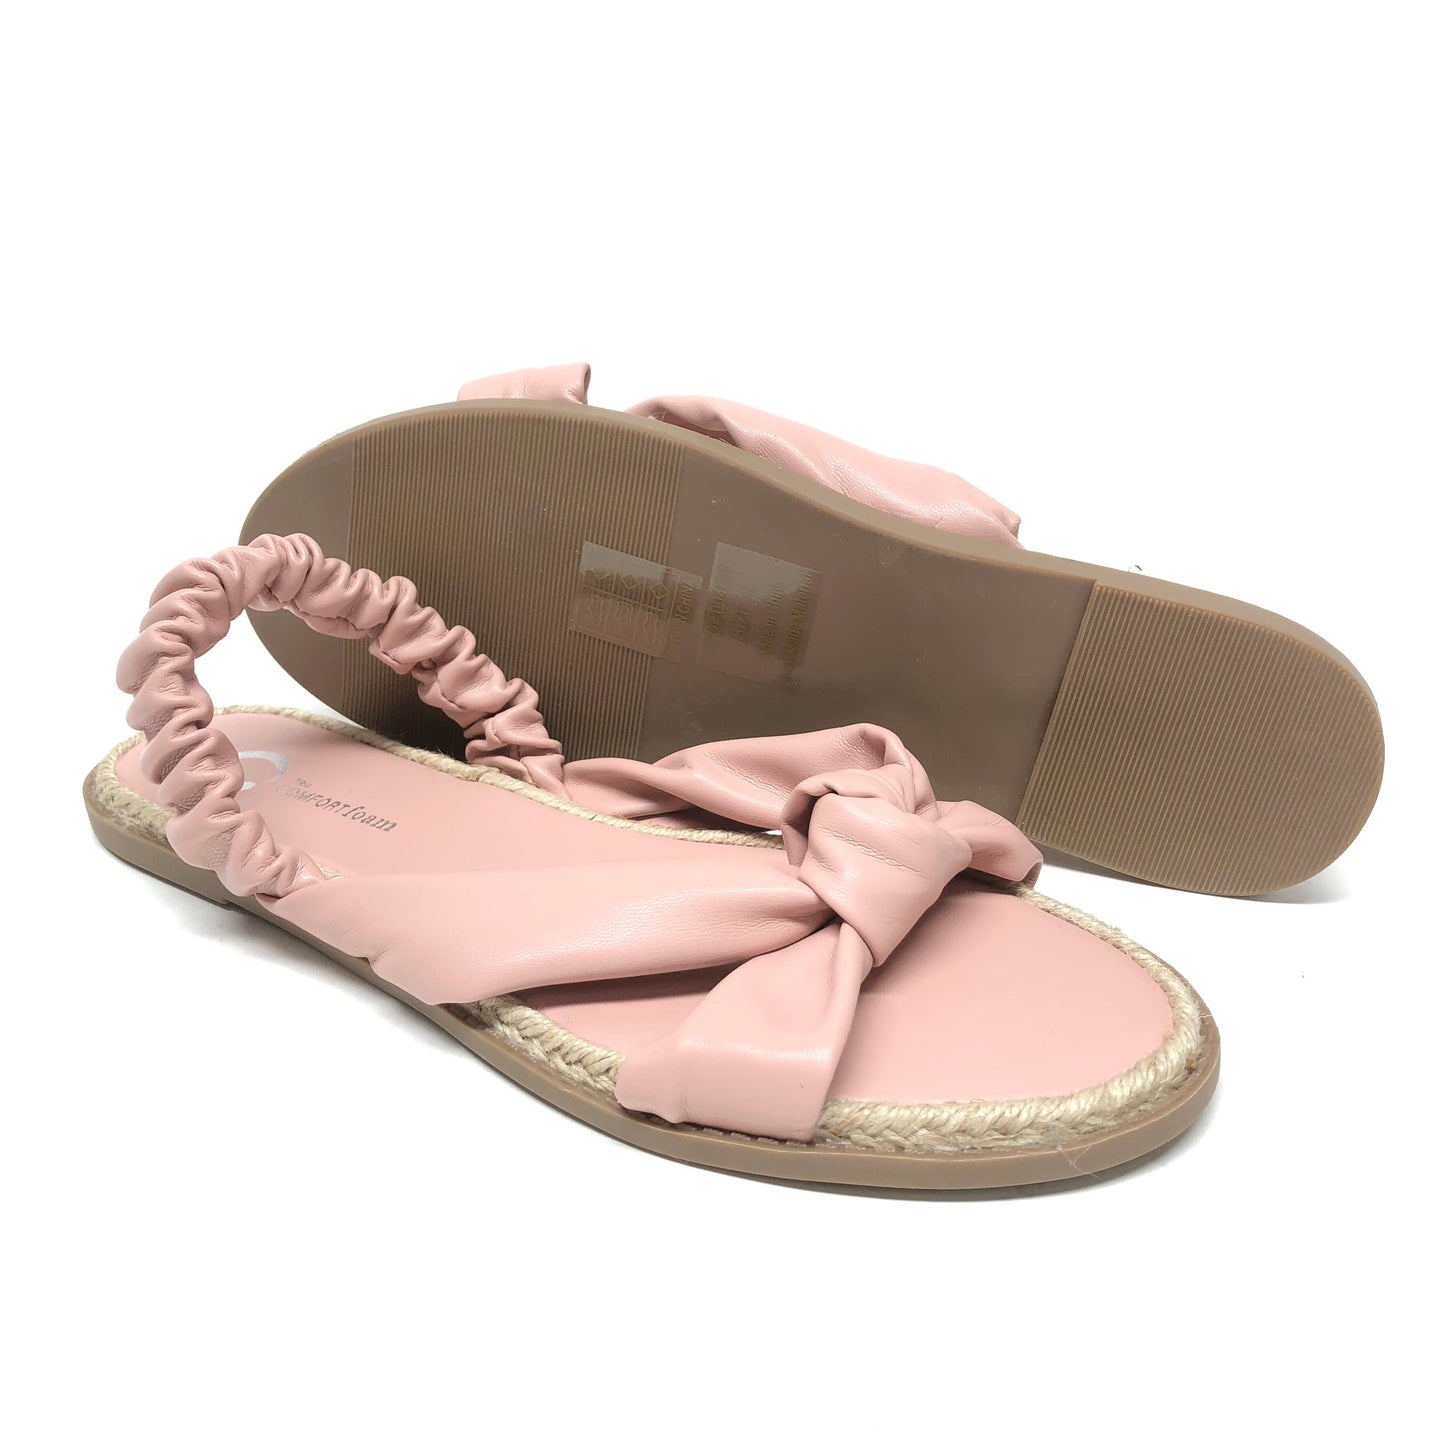 Sandals Flats By Journee  Size: 8